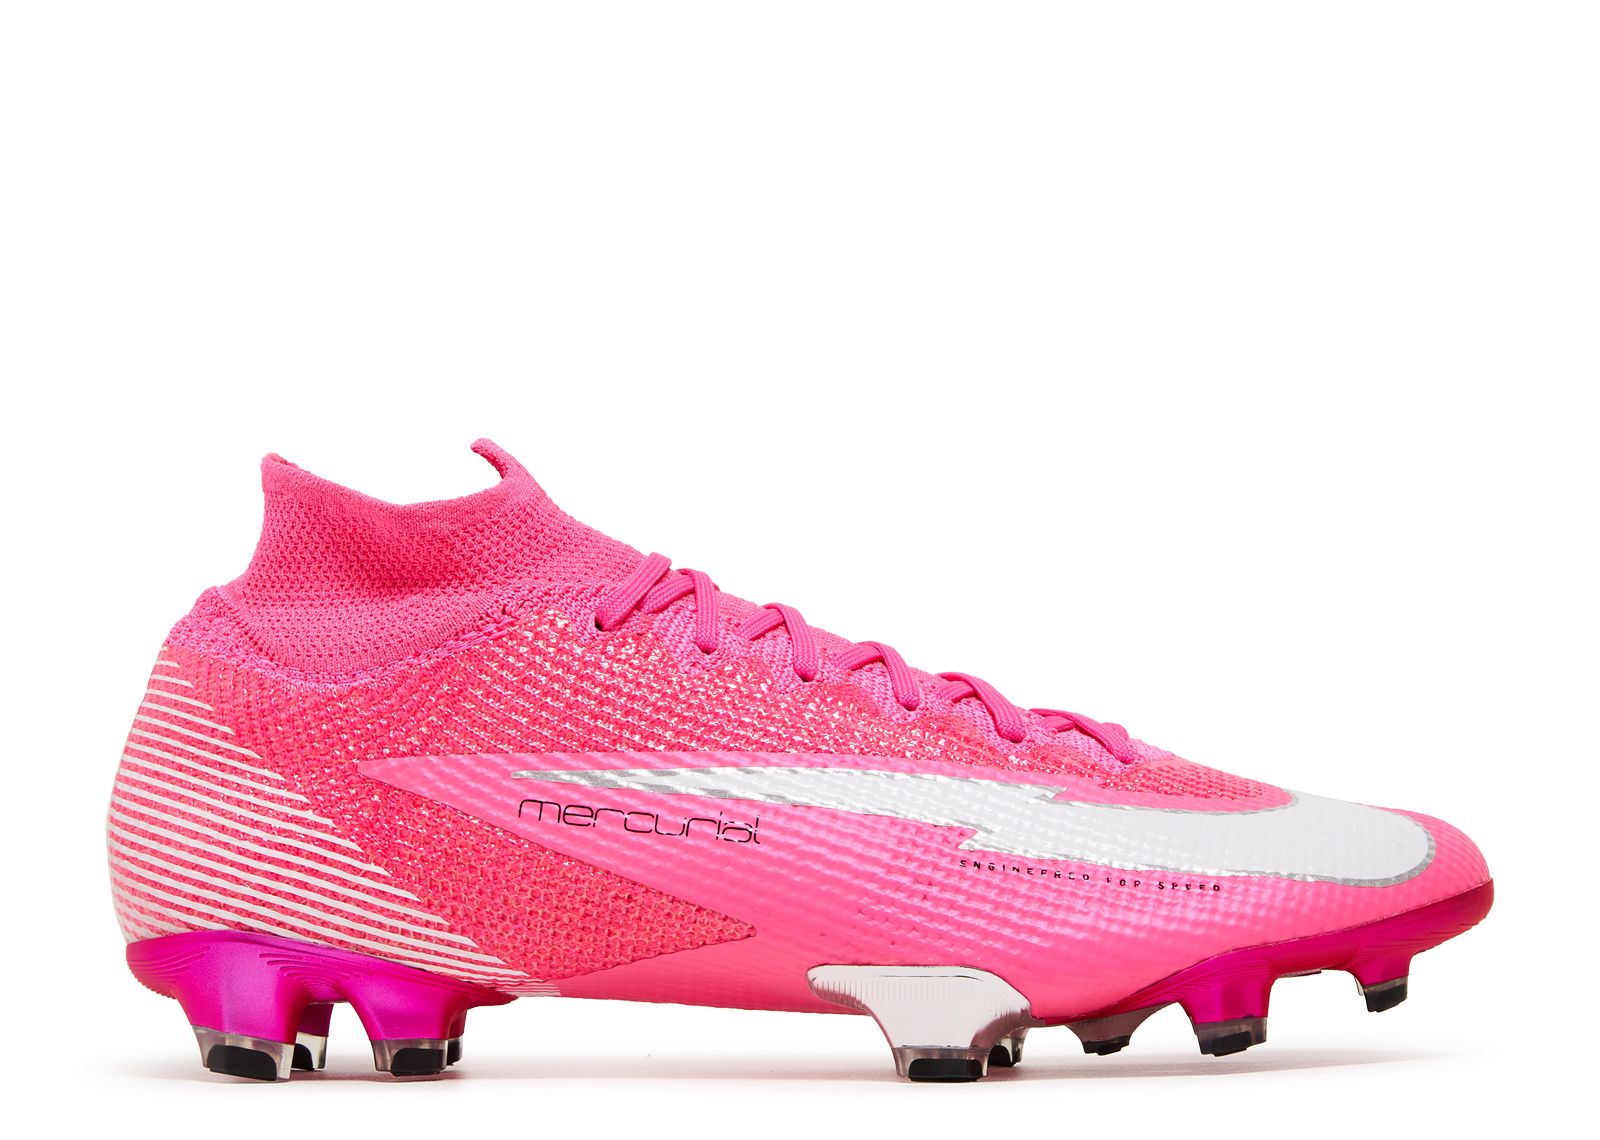 new arrival copa 20 fg mens soccer shoes 19 black mercurial superfly football boots boys outdoor sports mundial cleats ef8309 Кроссовки Nike Kylian Mbappé X Mercurial Superfly 7 Elite Fg 'Pink Panther', розовый